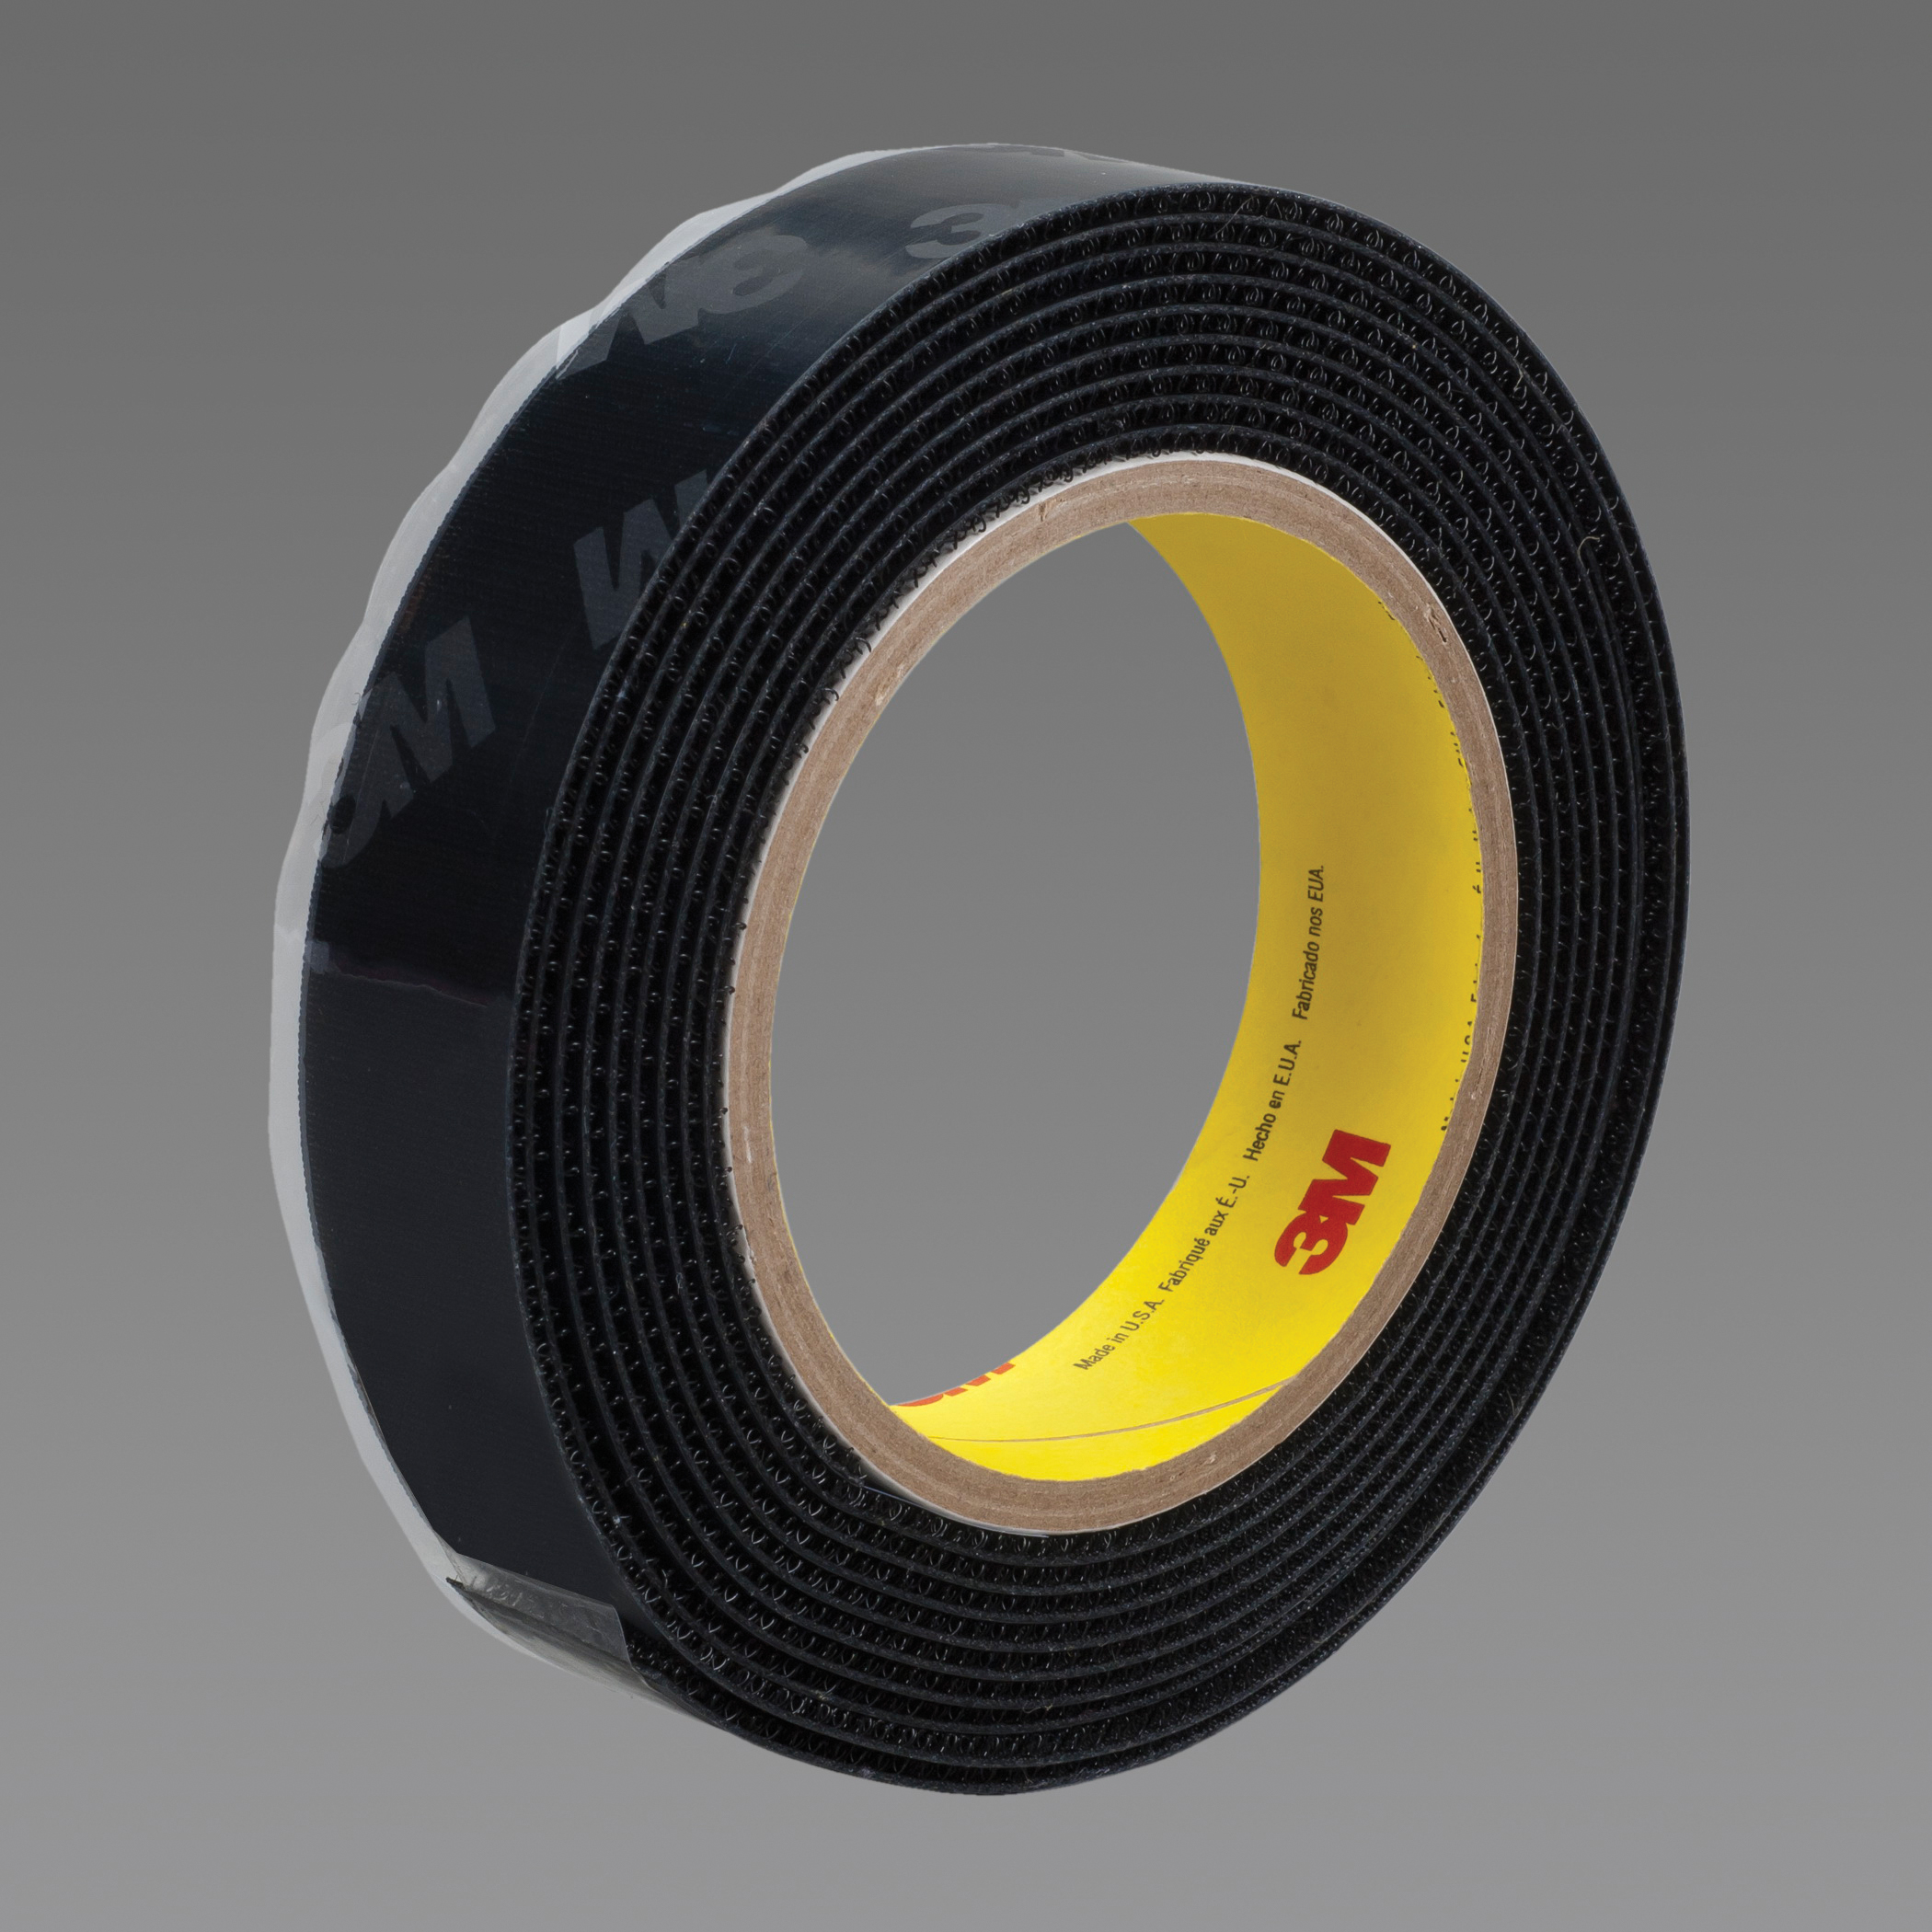 3M™ 021200-23061 General Performance Reclosable Hook Fastener Tape, 50 yd L x 1-1/2 in W, 0.15 in THK Engaged, High Tack Rubber Adhesive, Woven Nylon Backing, Black